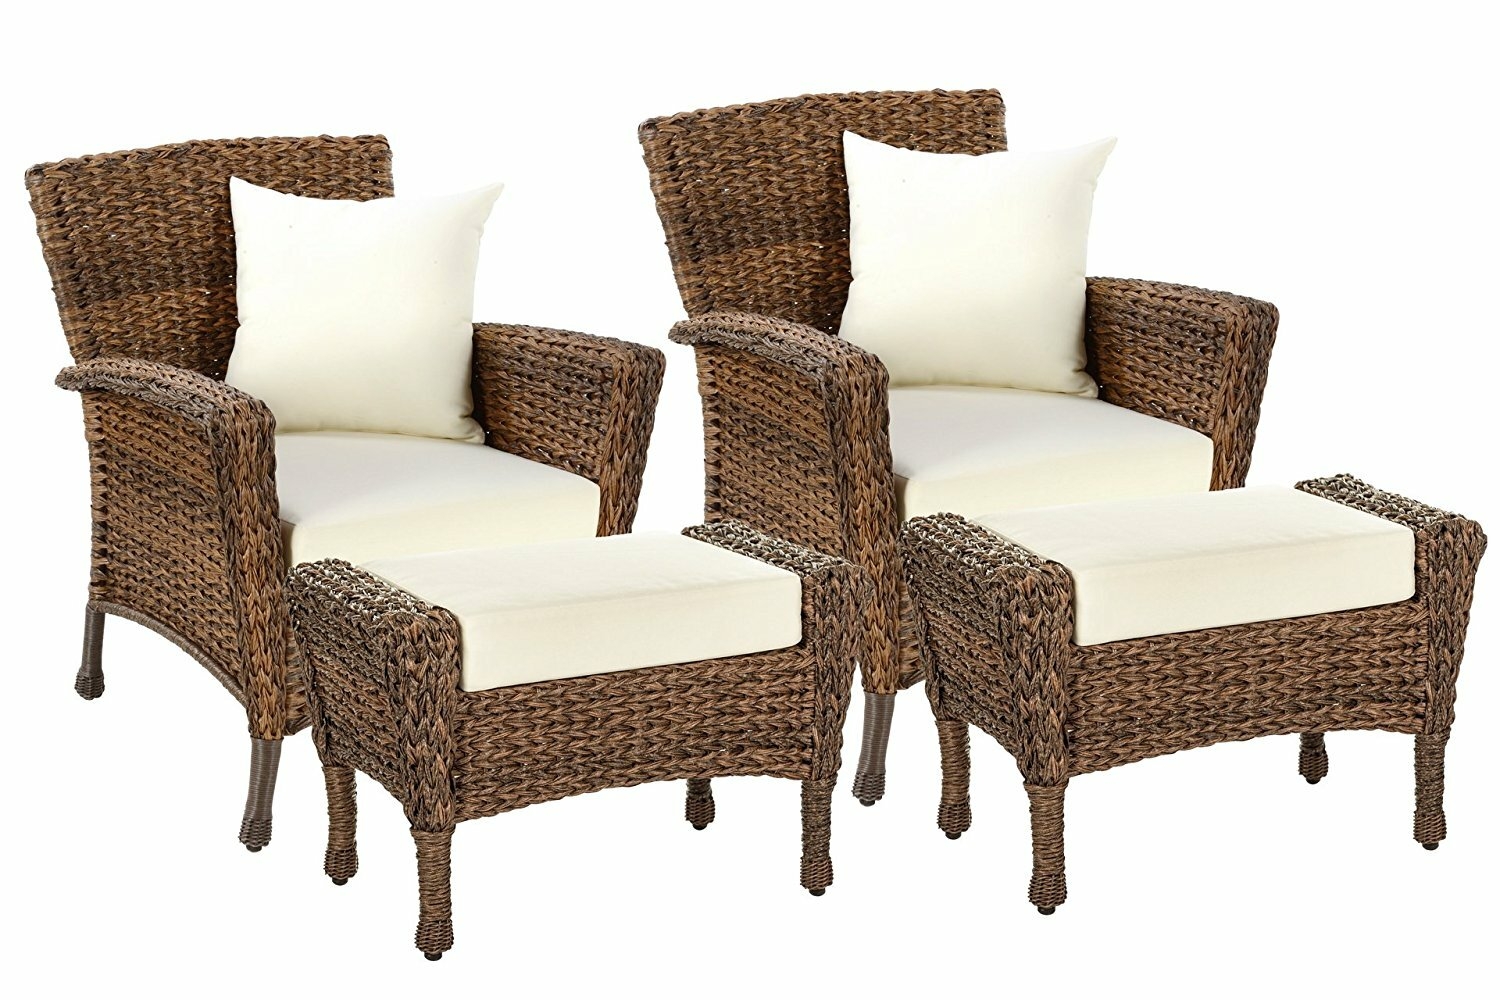 Patio Chair With Ottoman Set / Outdoor Chairs With Ottoman You Ll Love